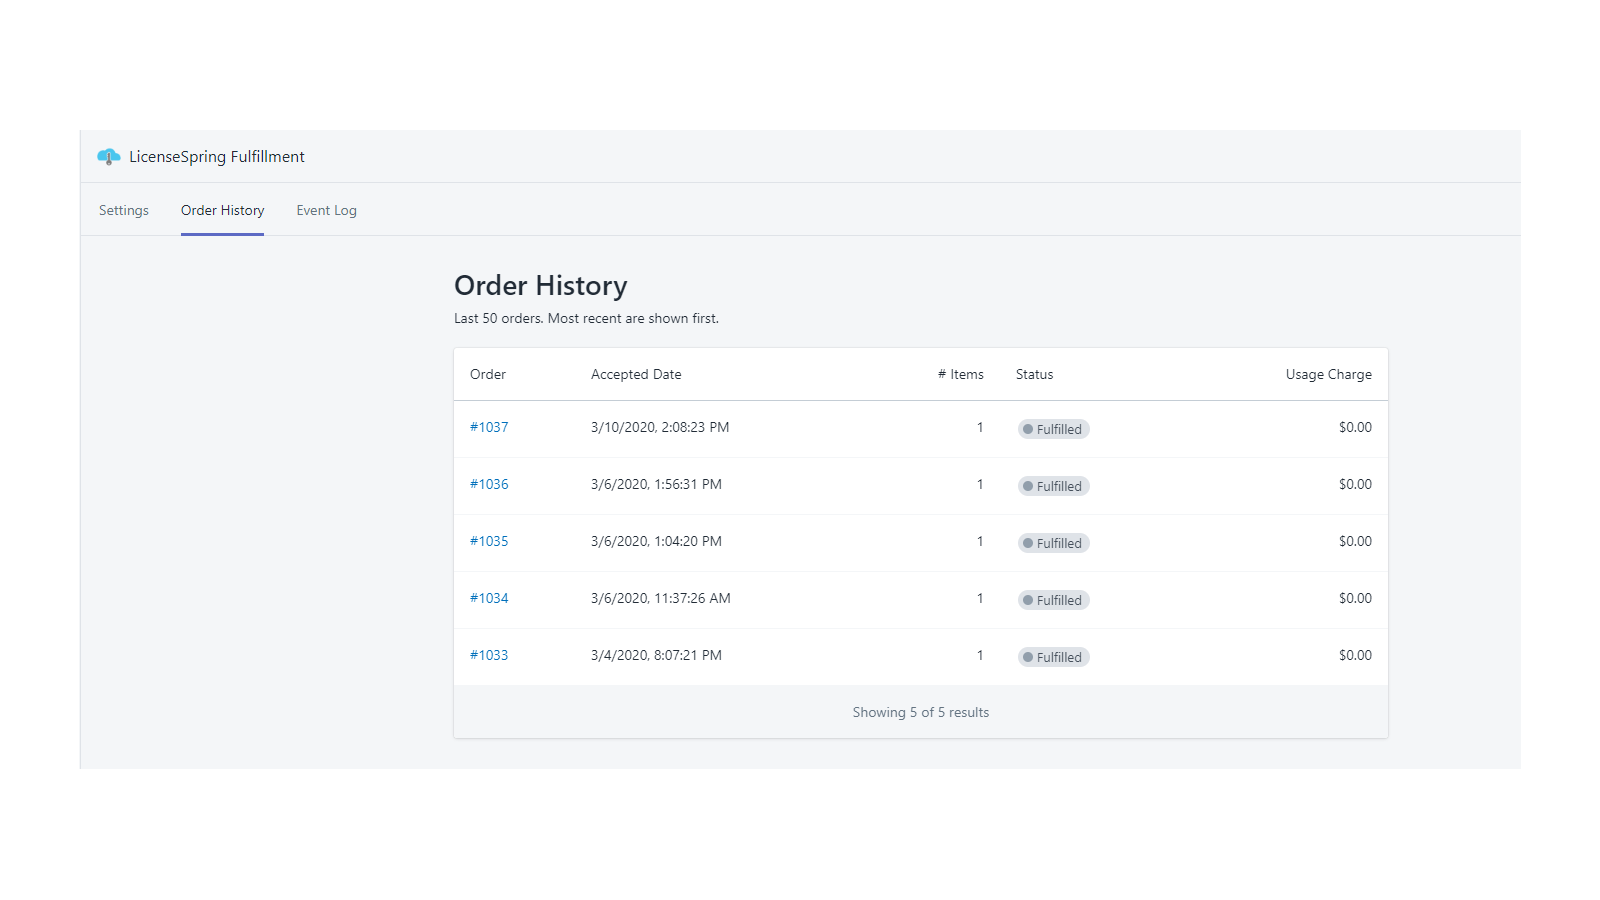 View history of orders processed by the app